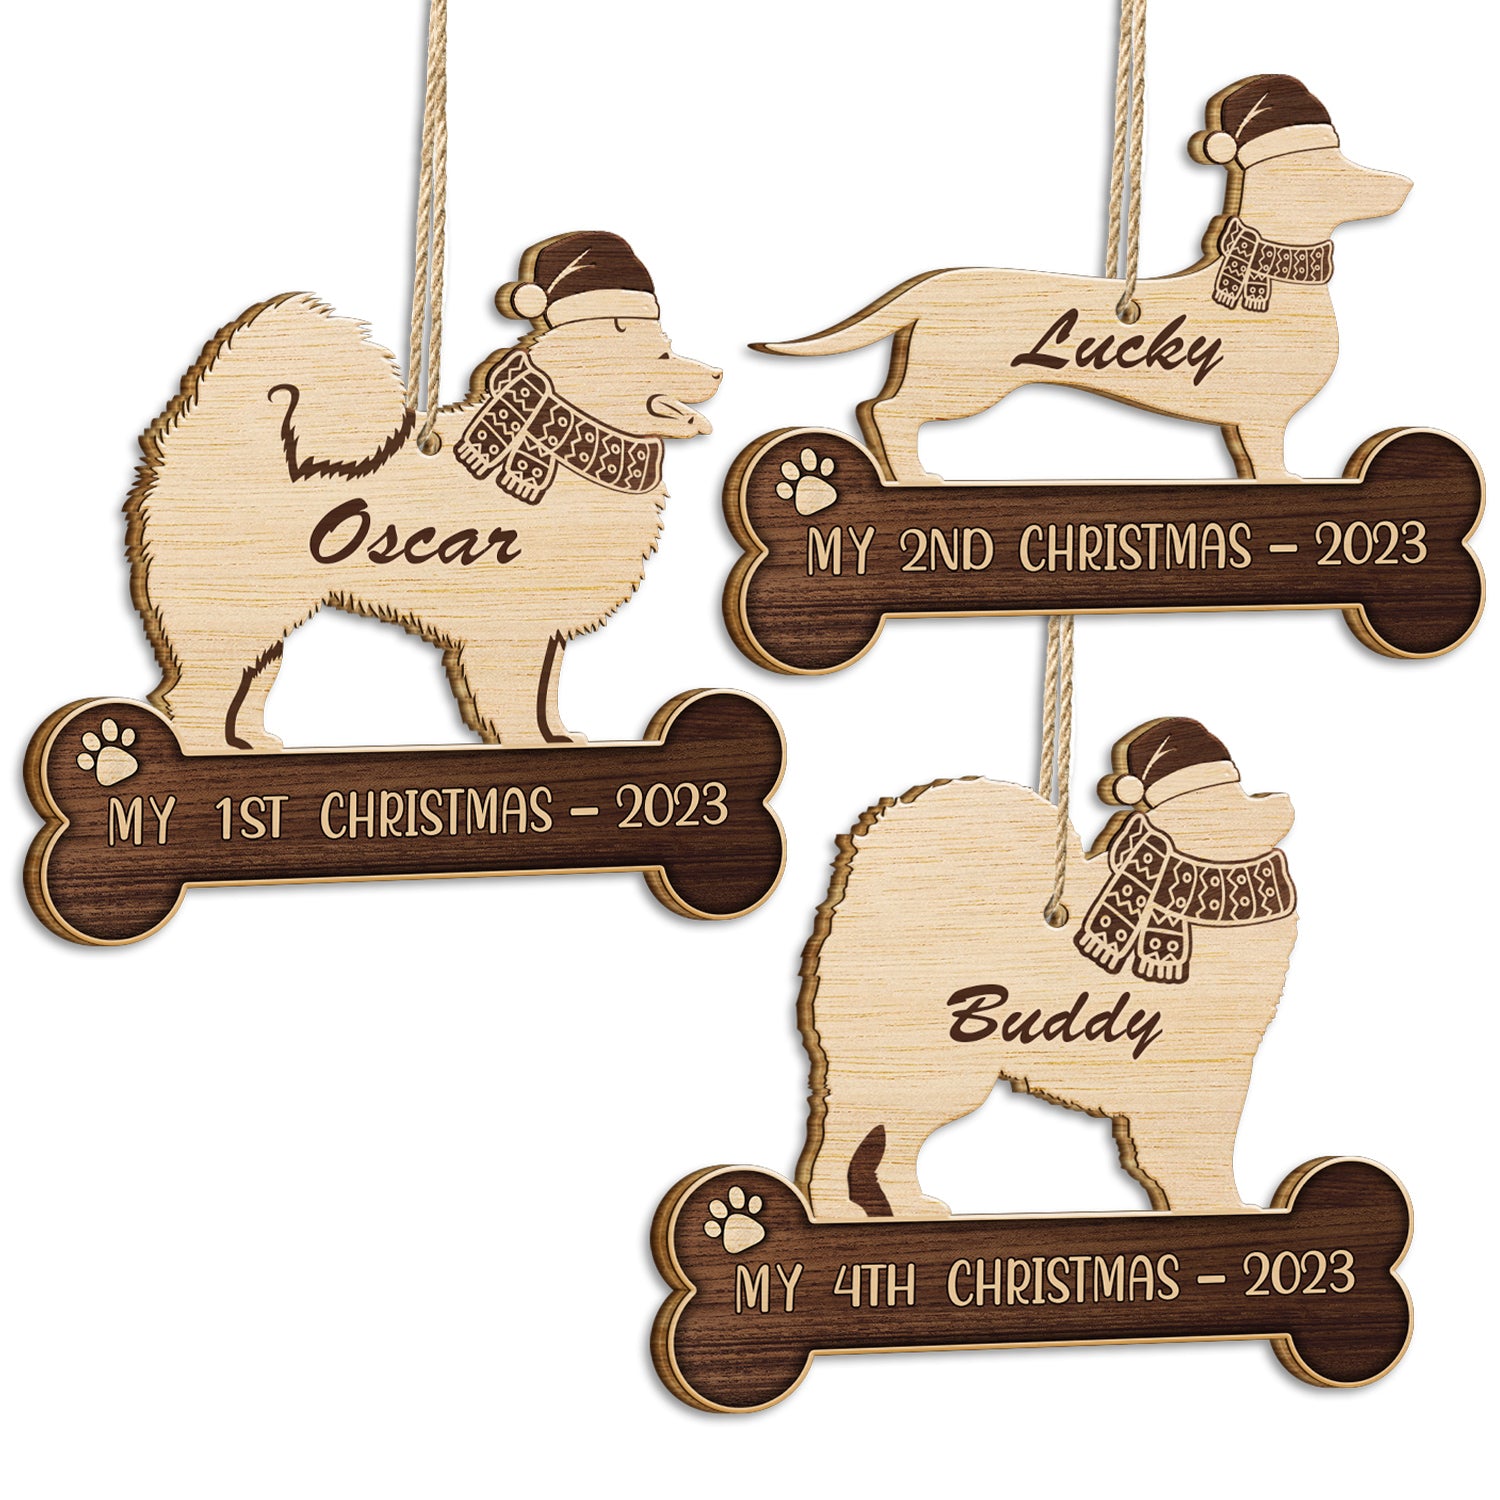 My 1st, 2nd, 3rd, 4th... Christmas 2023 - Xmas Gift For Dog Lovers, Pet Owners - Personalized Wooden Cutout Ornament